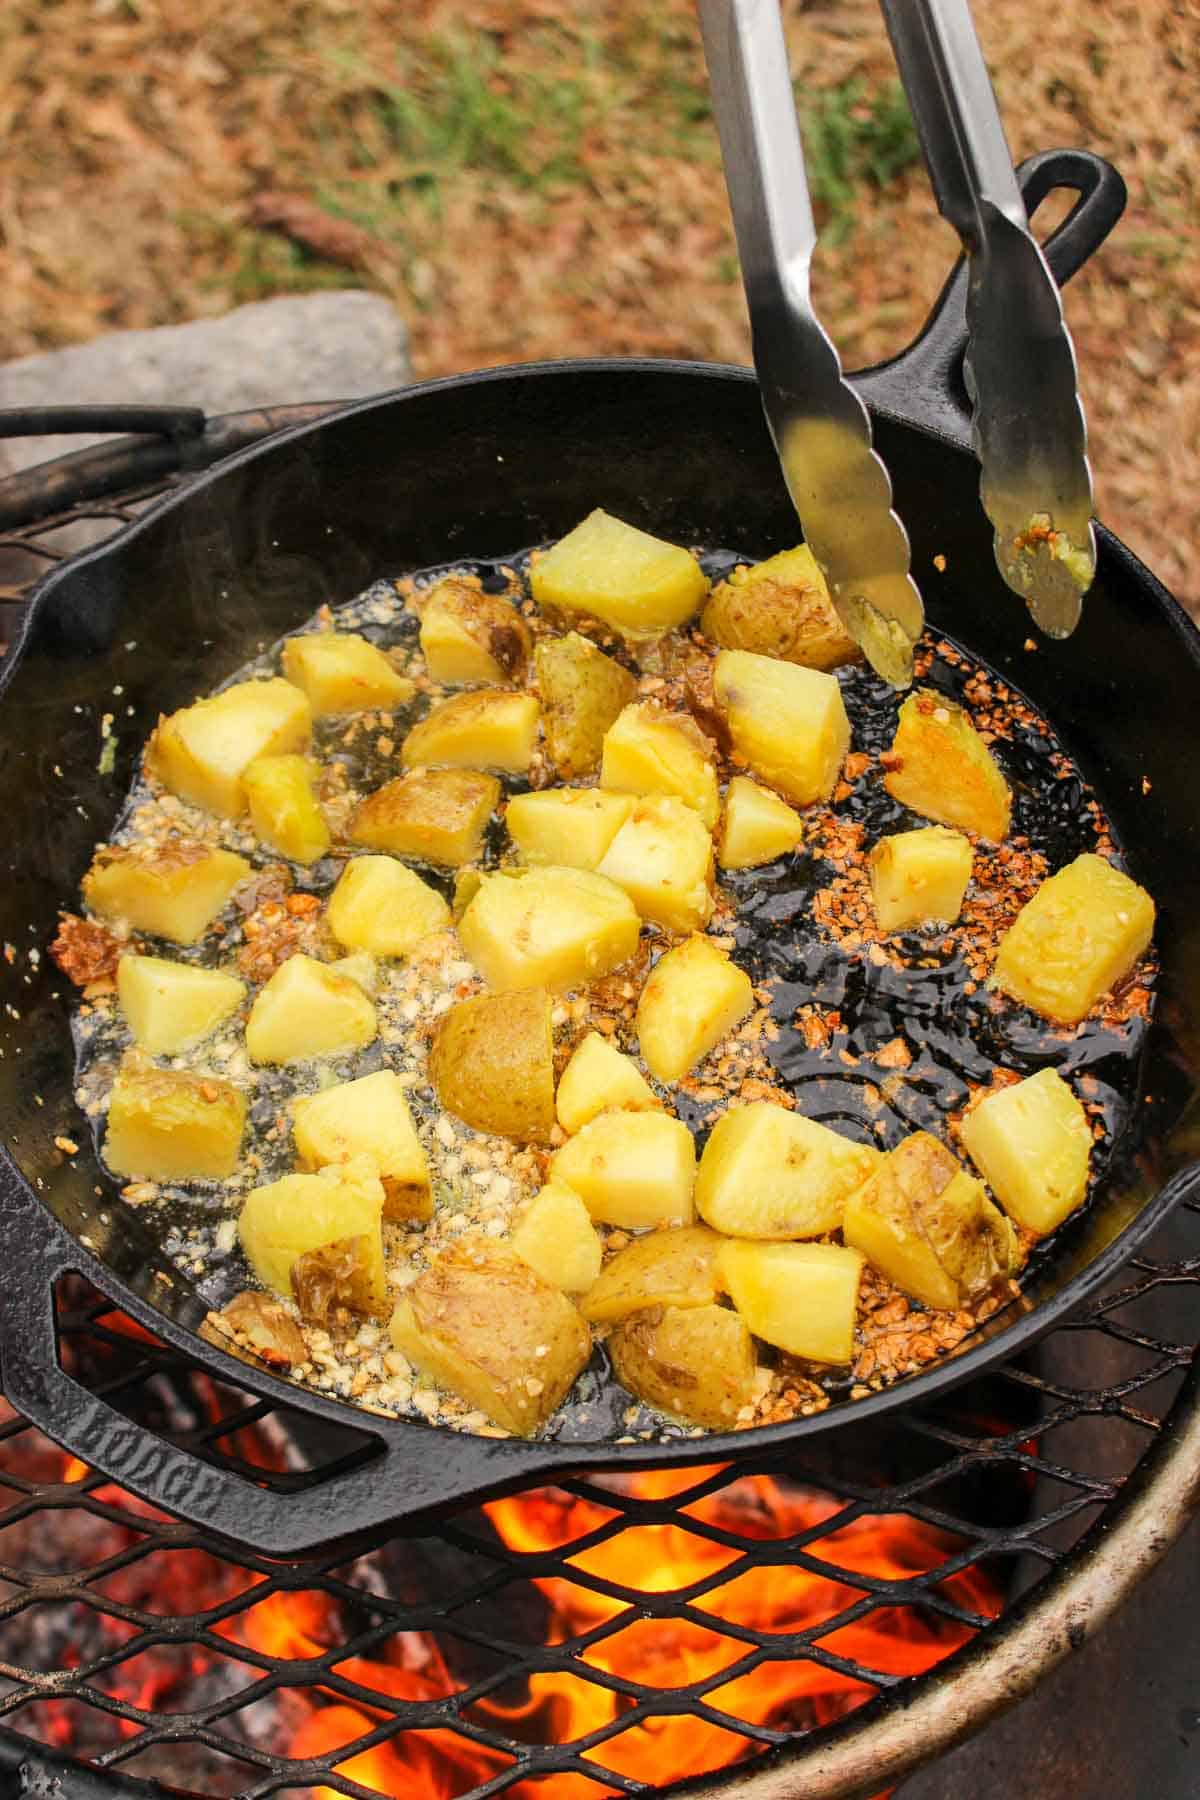 The potatoes now sliced and in a skillet with roasting garlic.